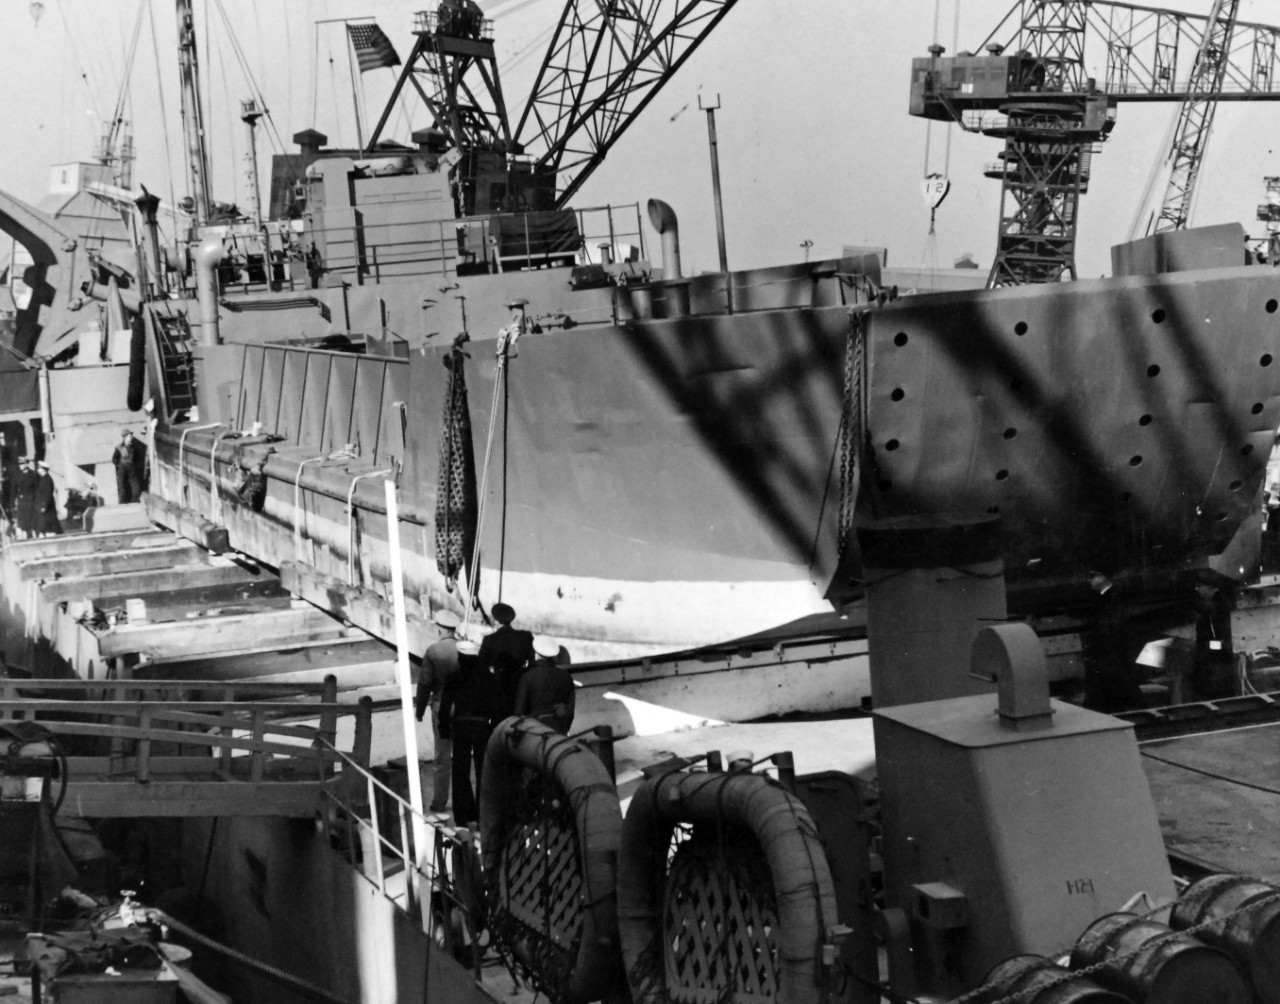 80-G-36267:  USS LST-383, December 1942.  Launching of LCT-401 over the side of USS LST-383 at Norfolk, Virginia, December 3, 1942.  LCT is being loaded on the LST.     Official U.S. Navy Photograph, now in the collections of the National Archives.  (2017/11/22).  